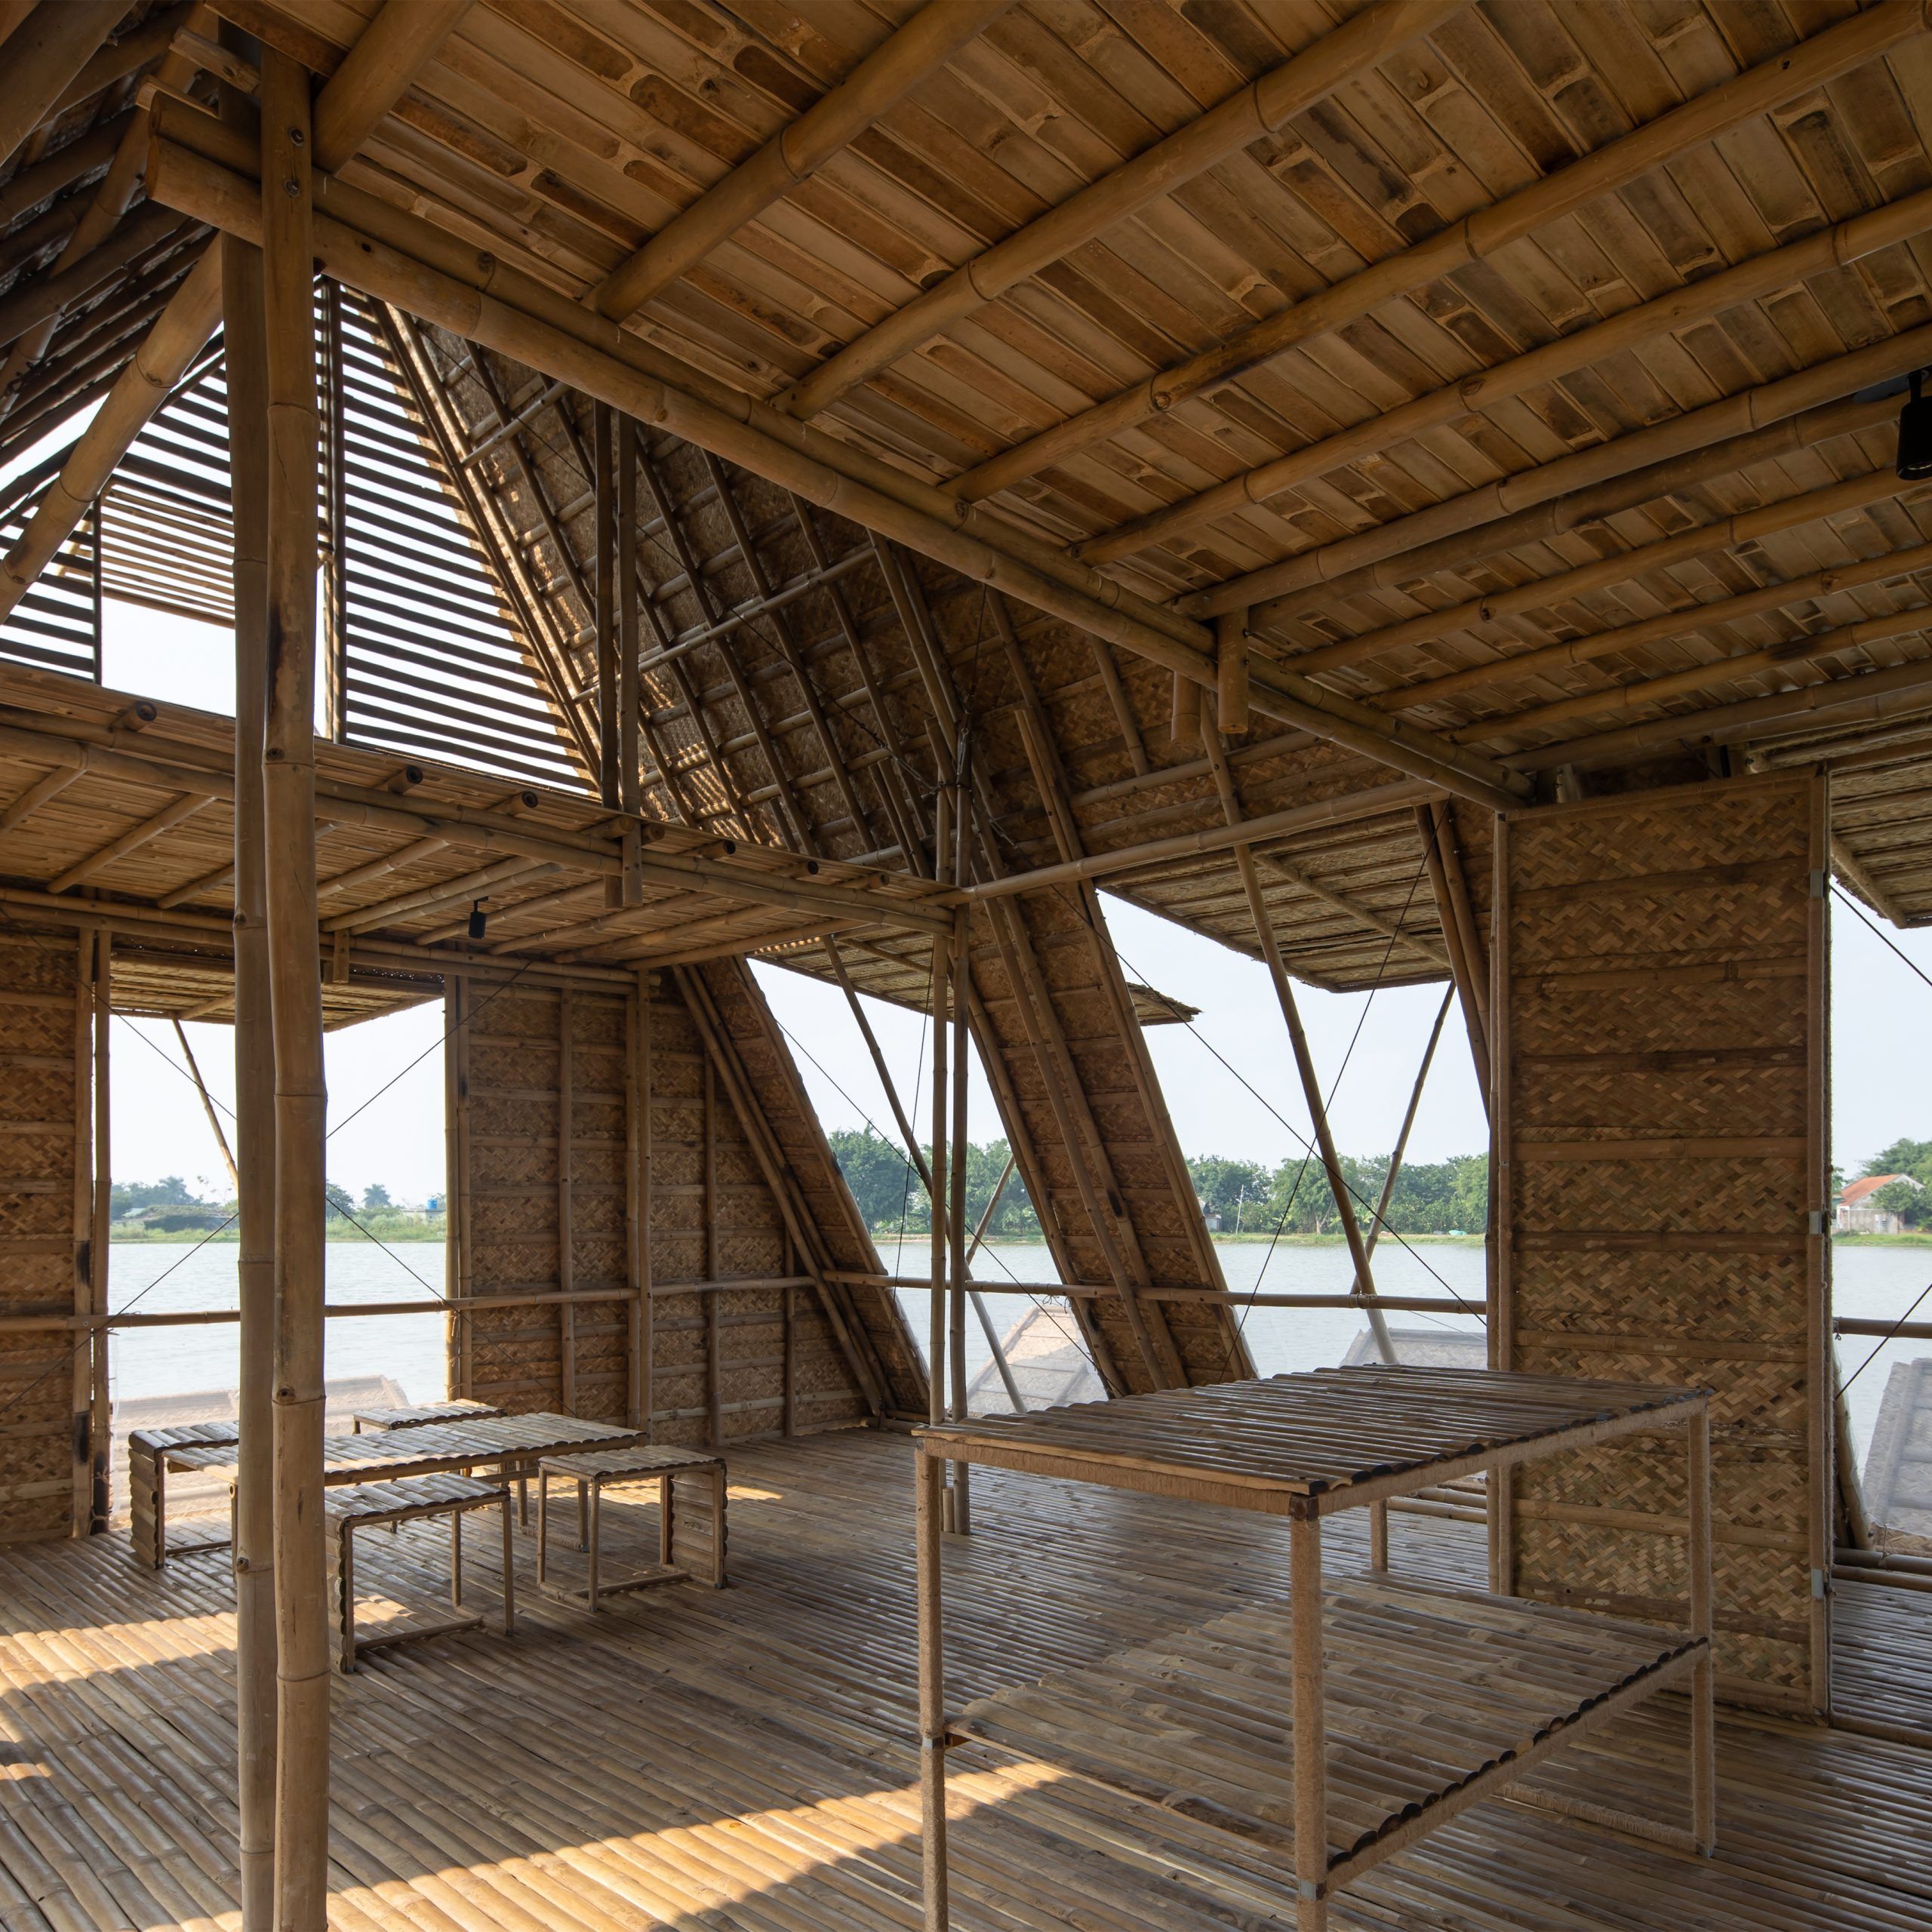 kienviet Nha tre noi–Mau nha danh cho nguoi dan vung song nuoc Viet Nam H and P Architects 11 2 scaled